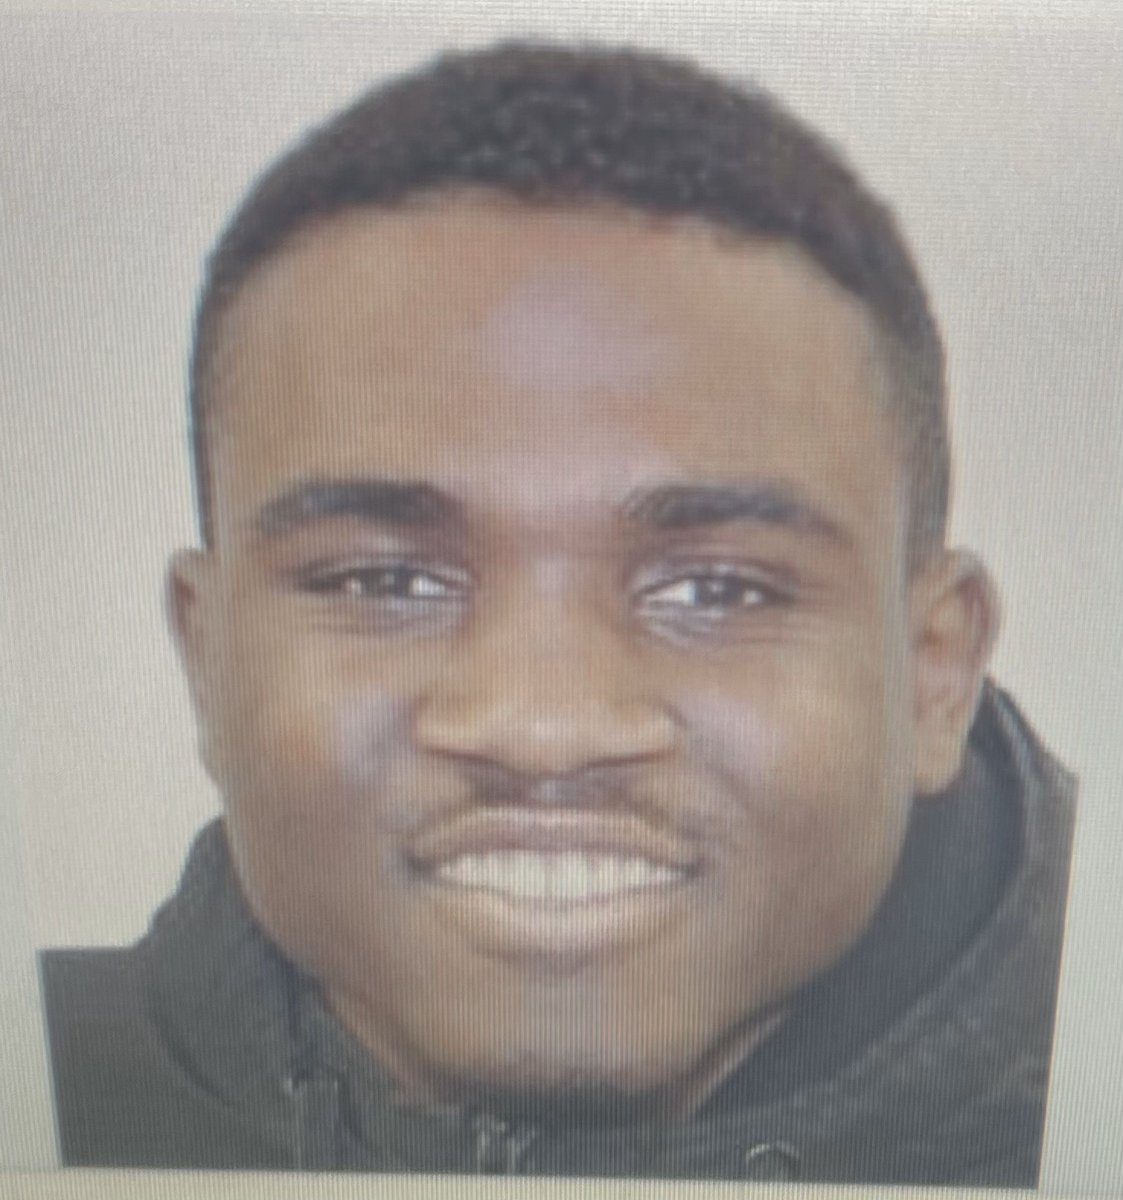 #MISSING: Robby M. Happy 28 years old, 6’1, 190 lbs. Last seen on 5/25 at 11 a.m., in the #Woodlawn area unknown clothing description. He has a cognitive disorder. Anyone with information, please call 911 or 410-307-2020 #HelpLocate #BCoPD